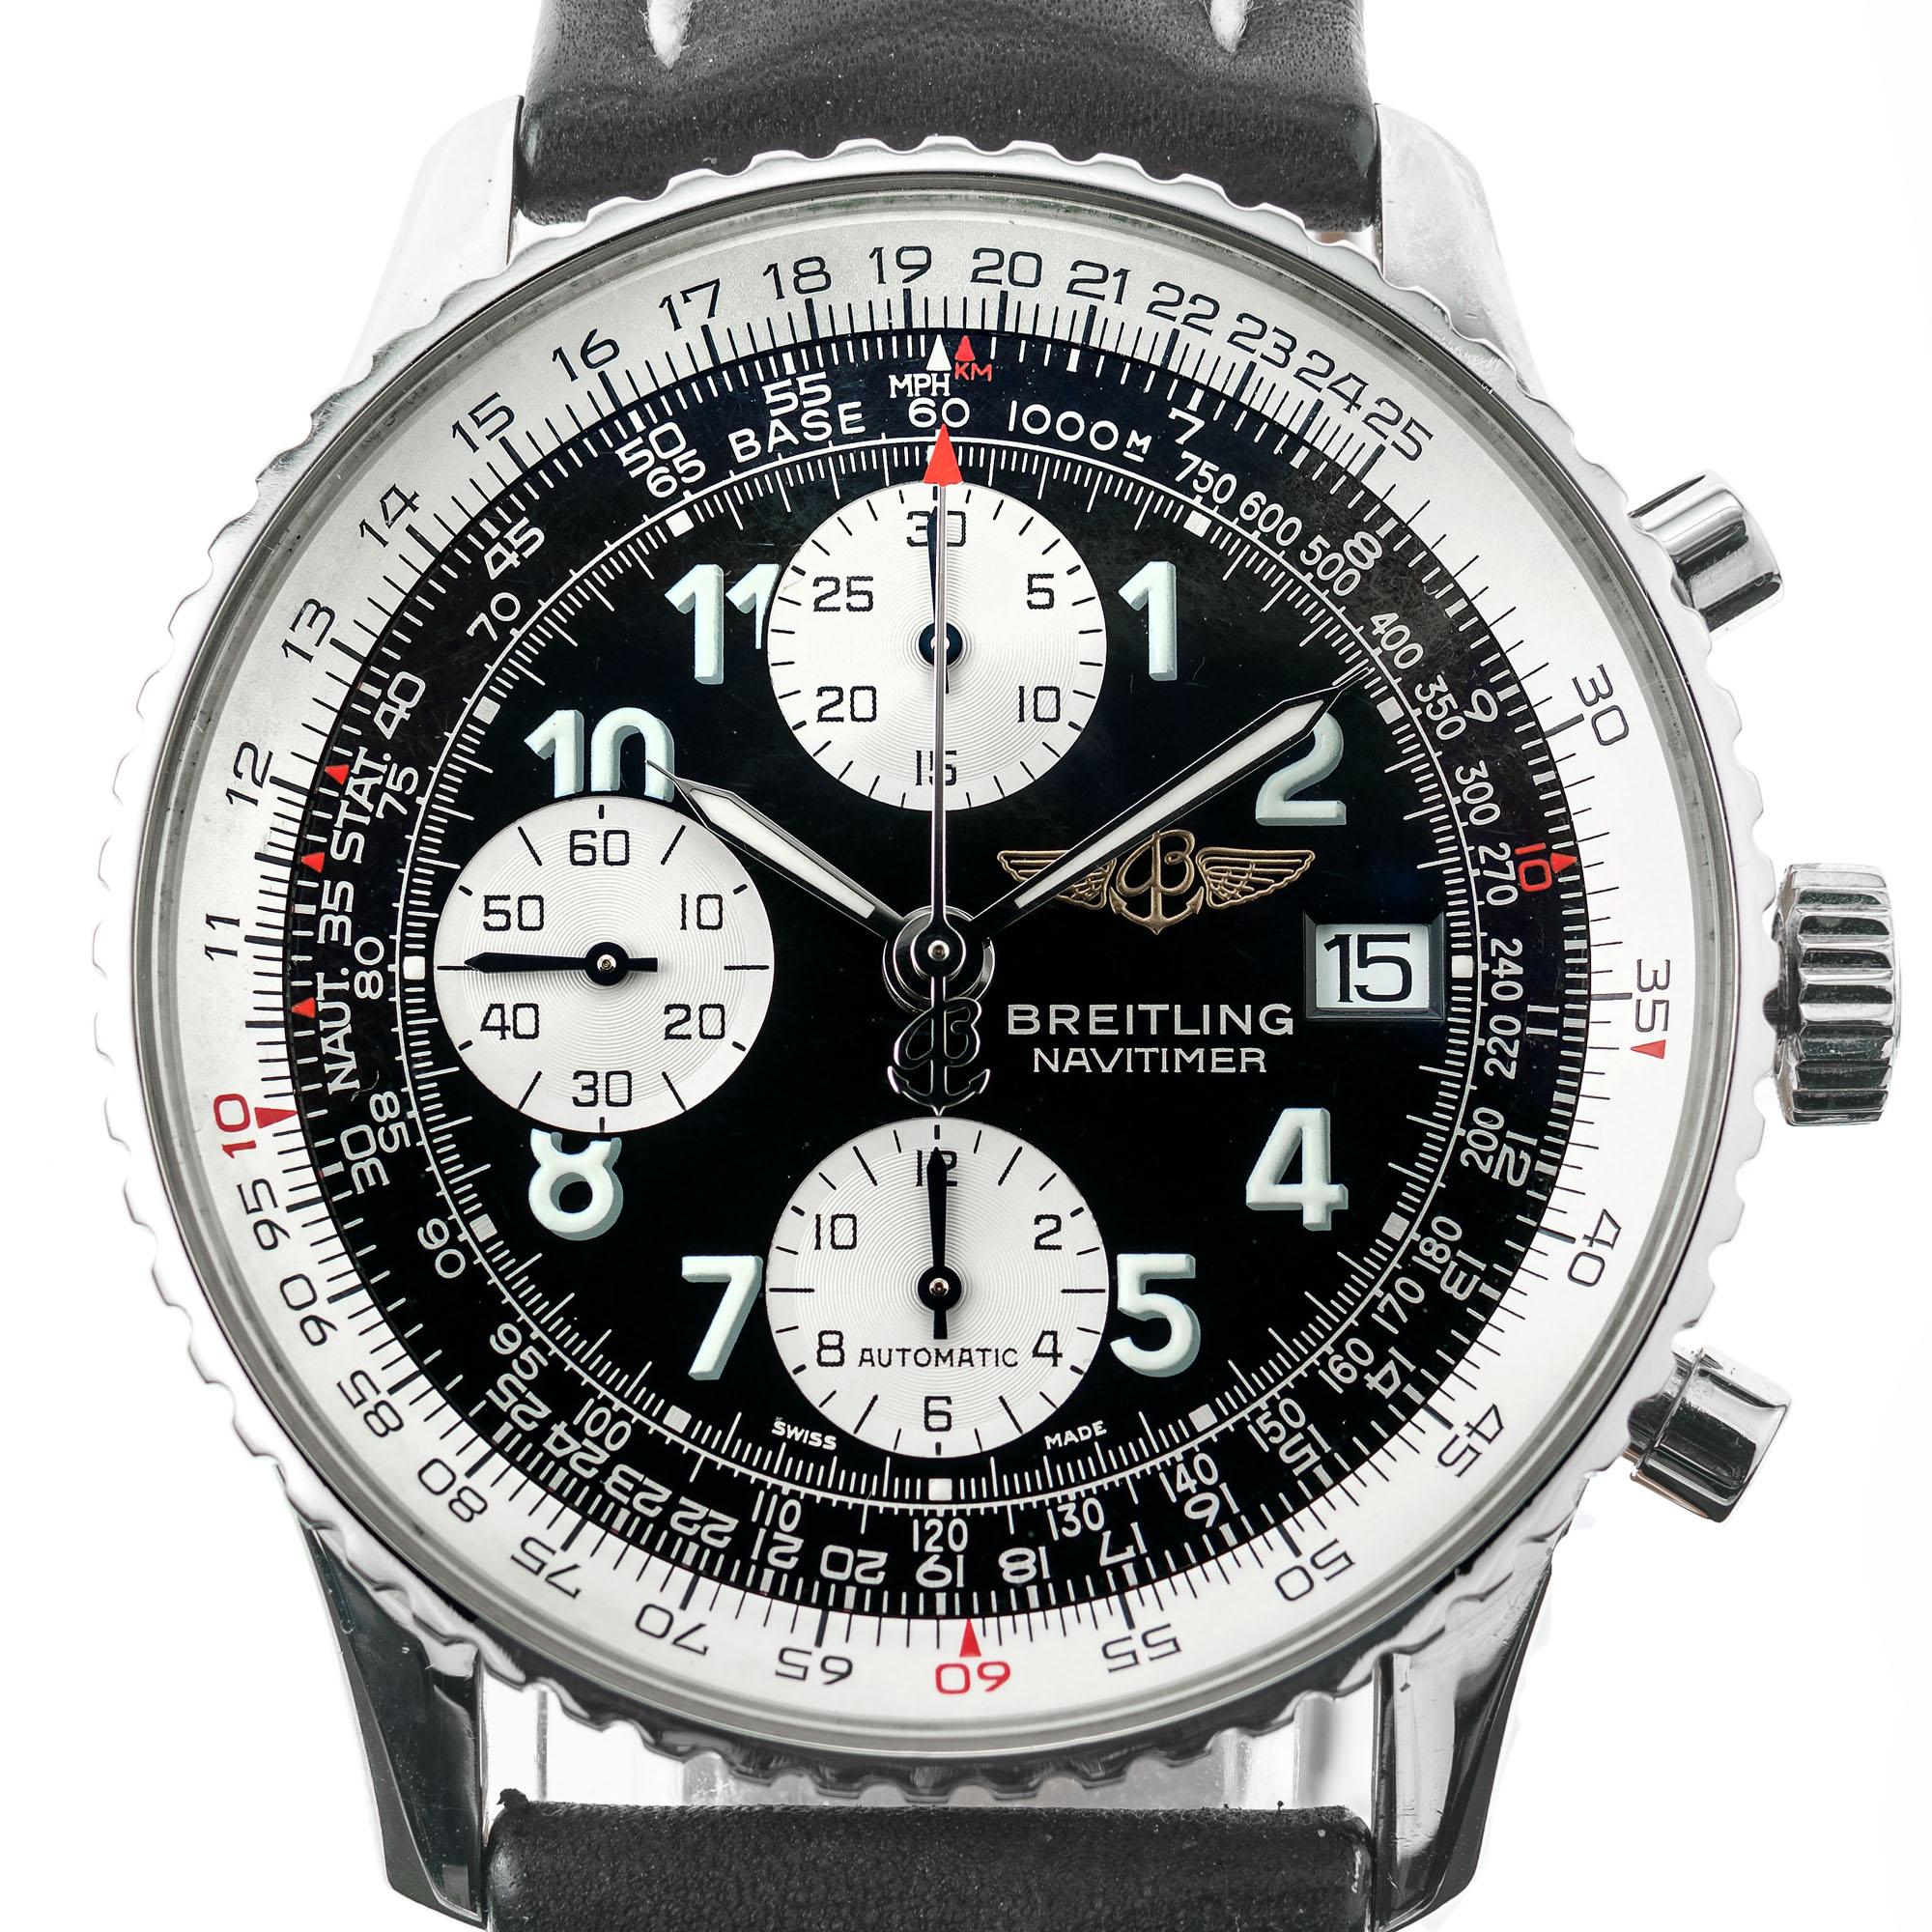 Breitling Mens steel navitmer chronograph. Recently serviced. New Breitling band.

92.7 grams
Length: 47.48m
Width: 40mm
Band width at case: 22mm
Case thickness: 14.41mm
Band: Original Breitling black & white stitching
Dial: Black
Outside case: